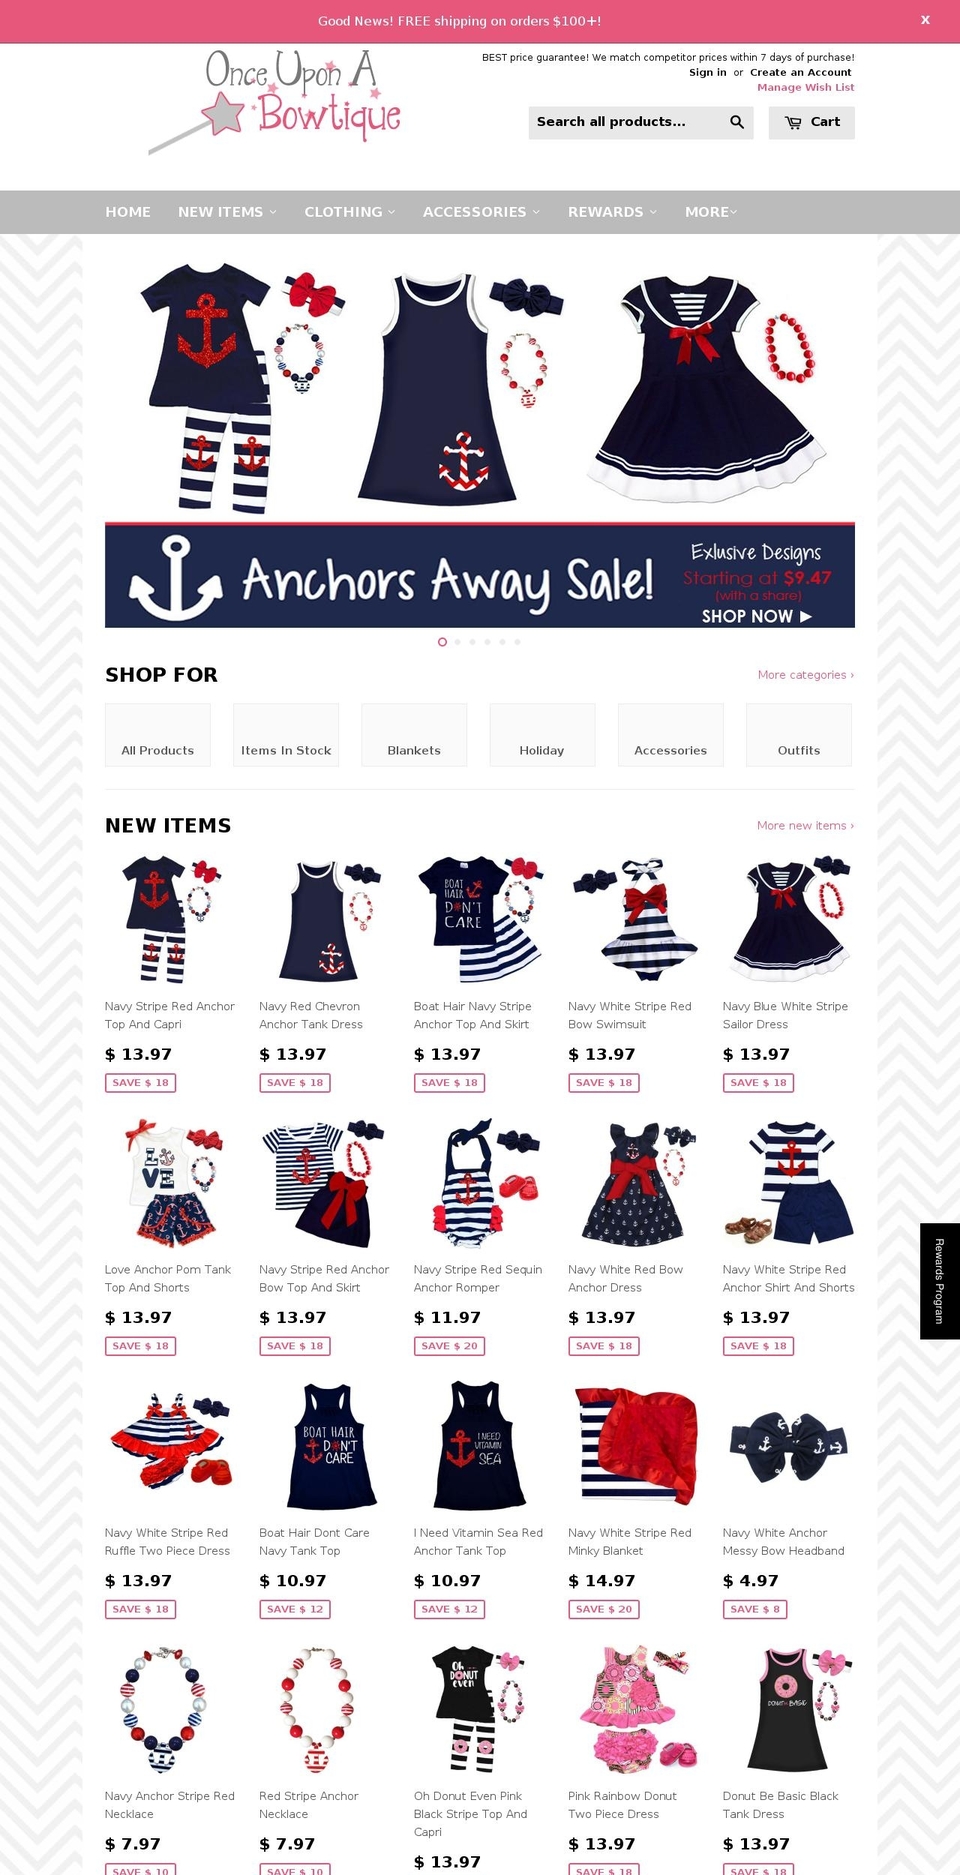 Supply Shopify theme site example uponabowtique.com